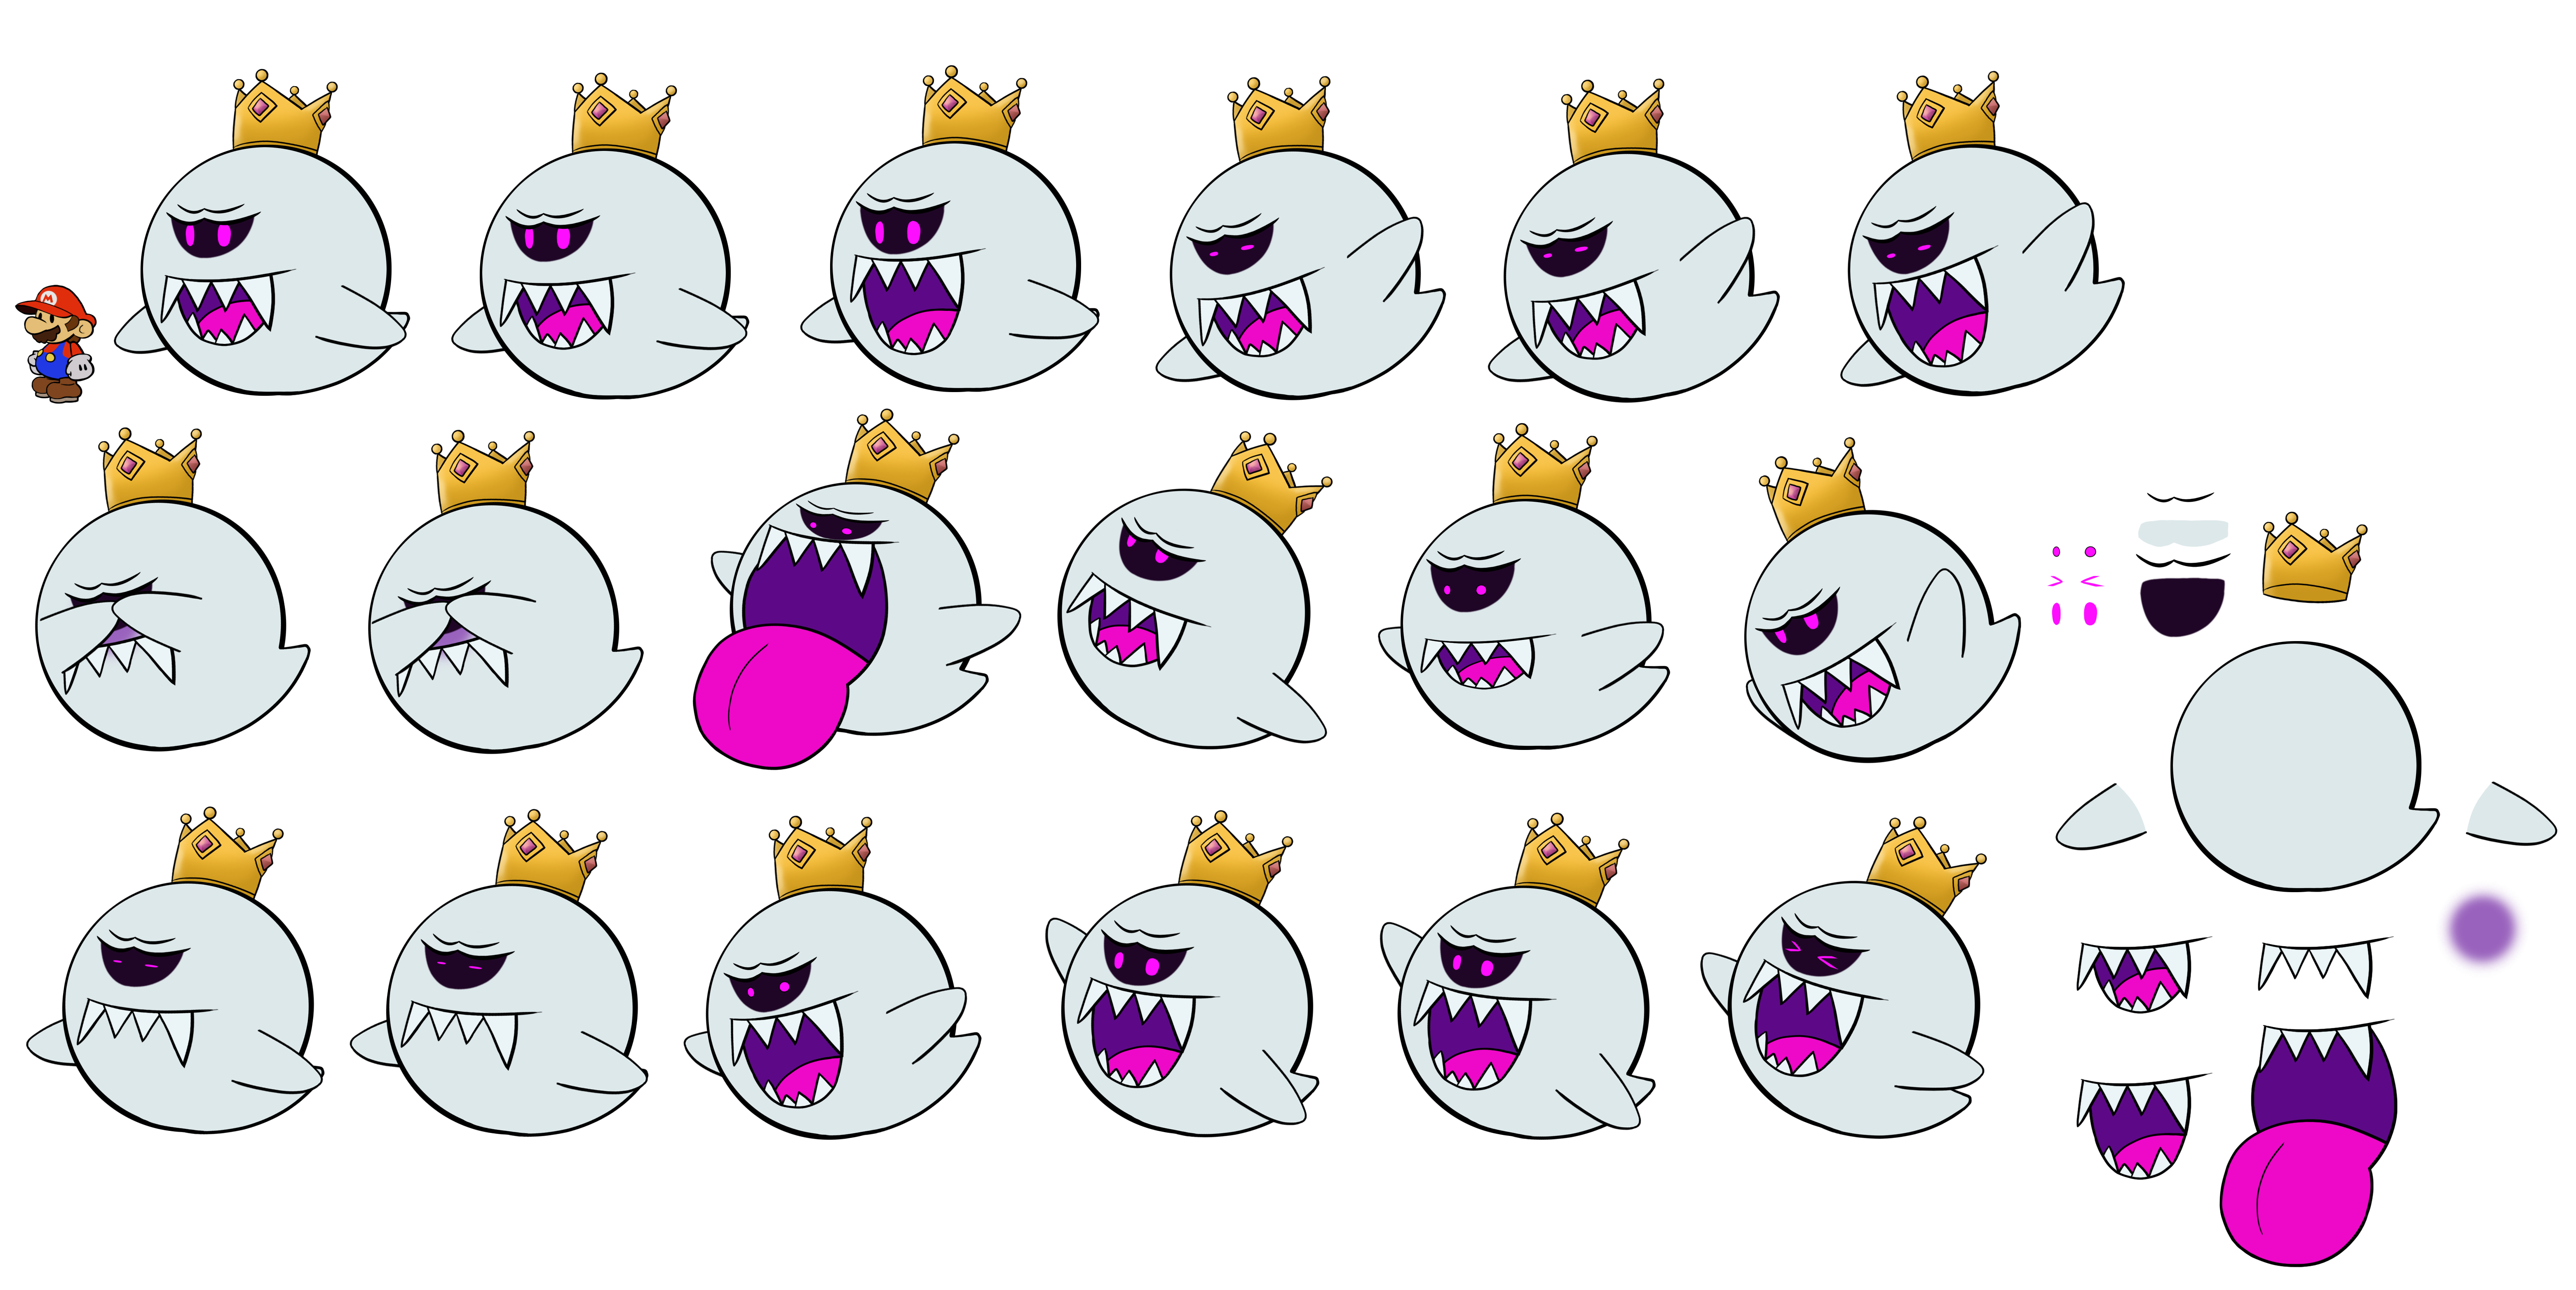 King Boo (Paper Mario-Style)